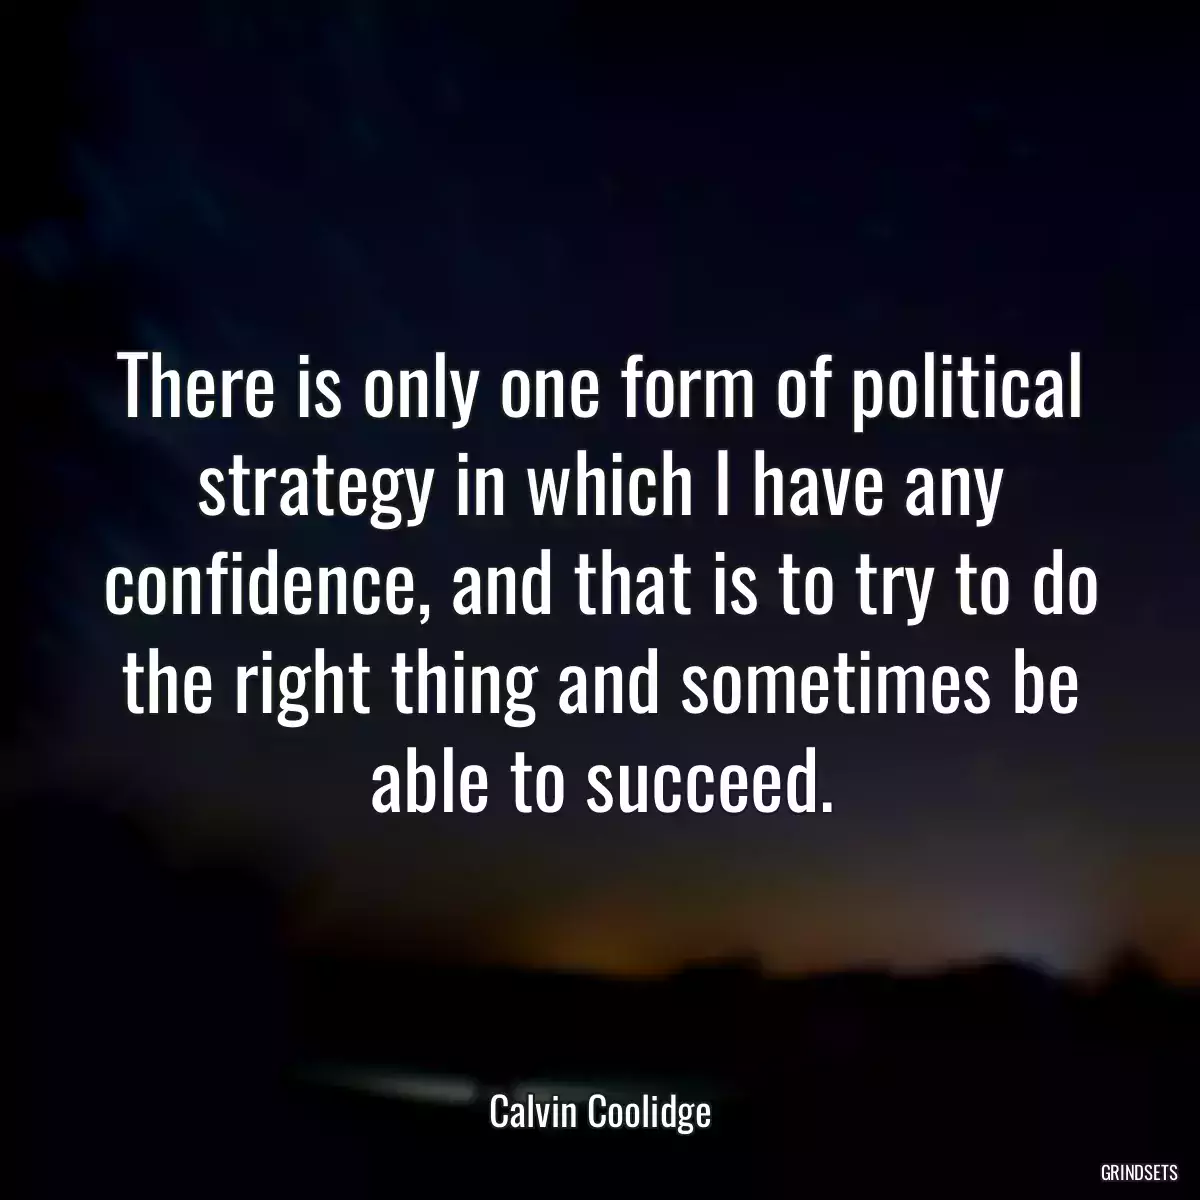 There is only one form of political strategy in which I have any confidence, and that is to try to do the right thing and sometimes be able to succeed.